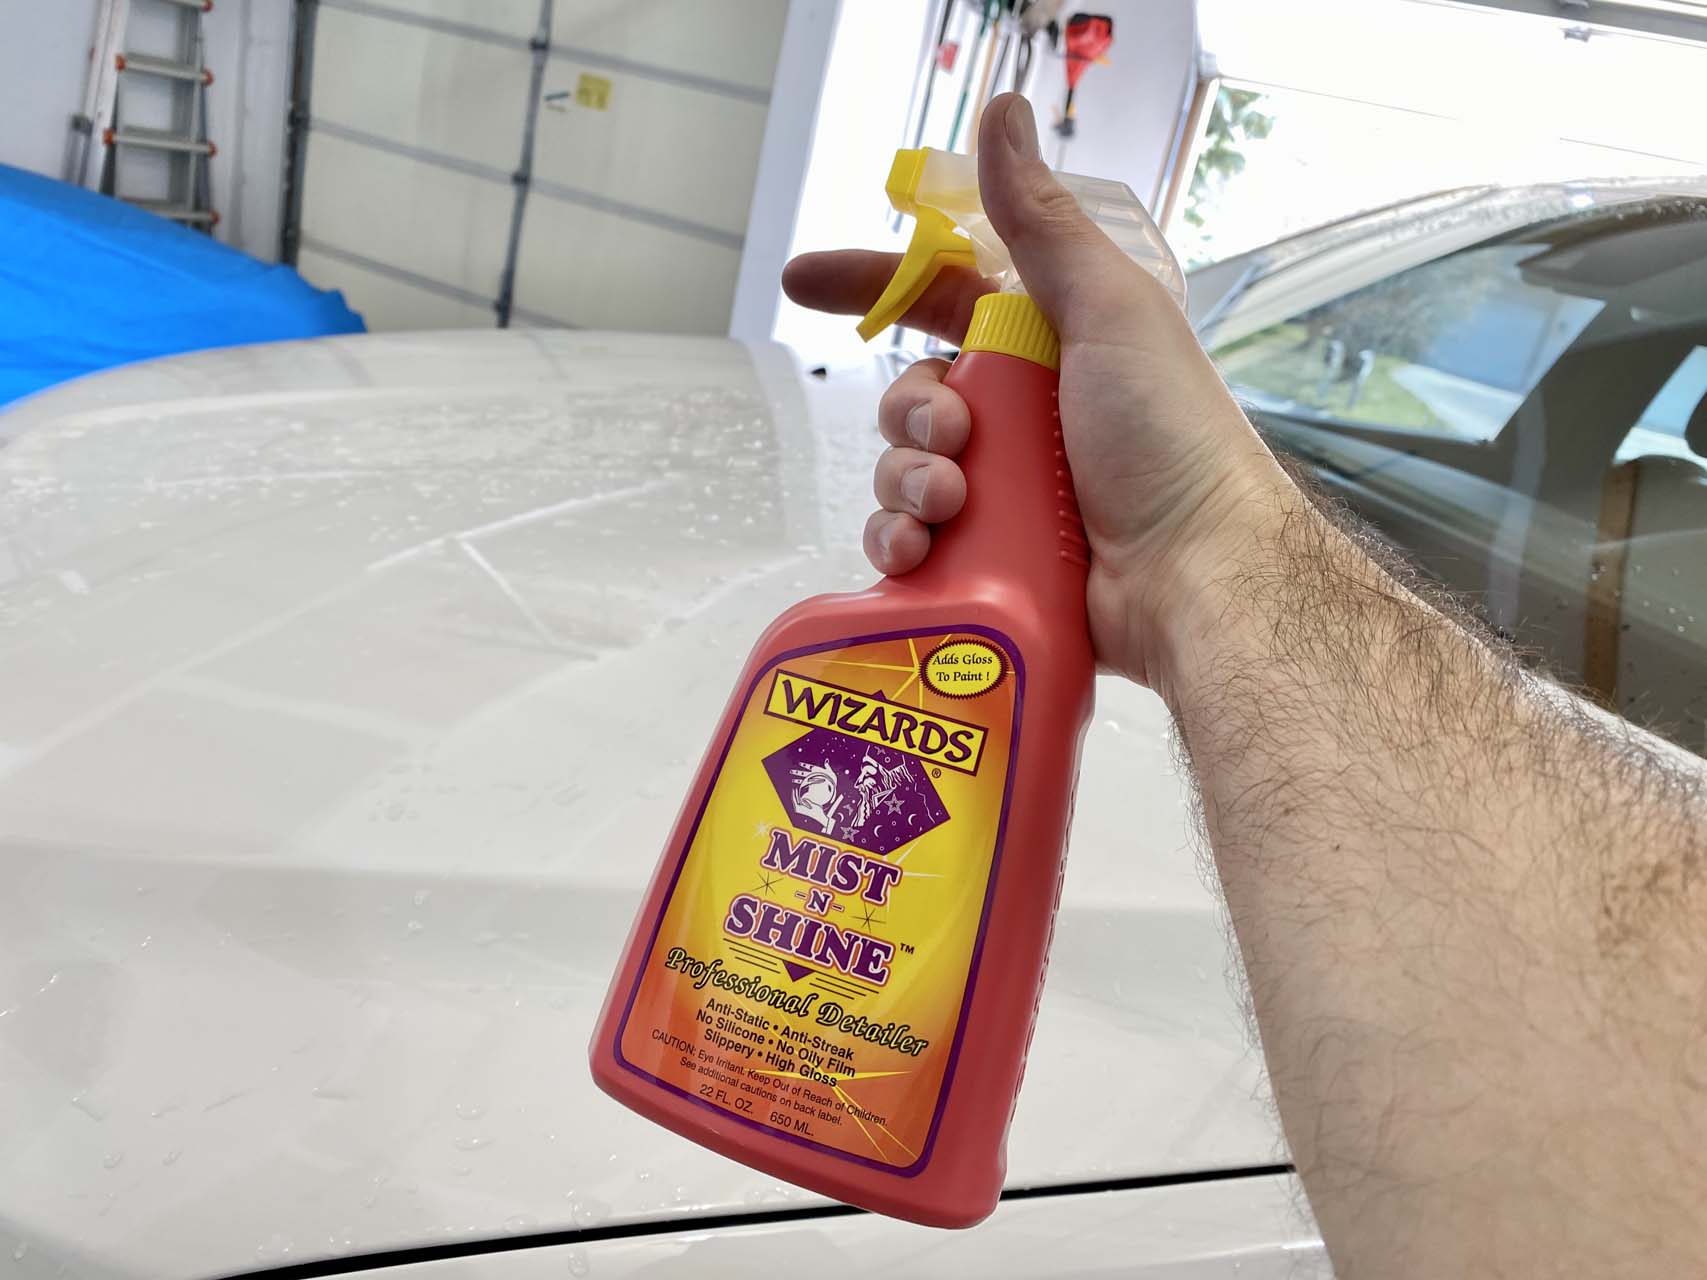 How to wash a car like a pro